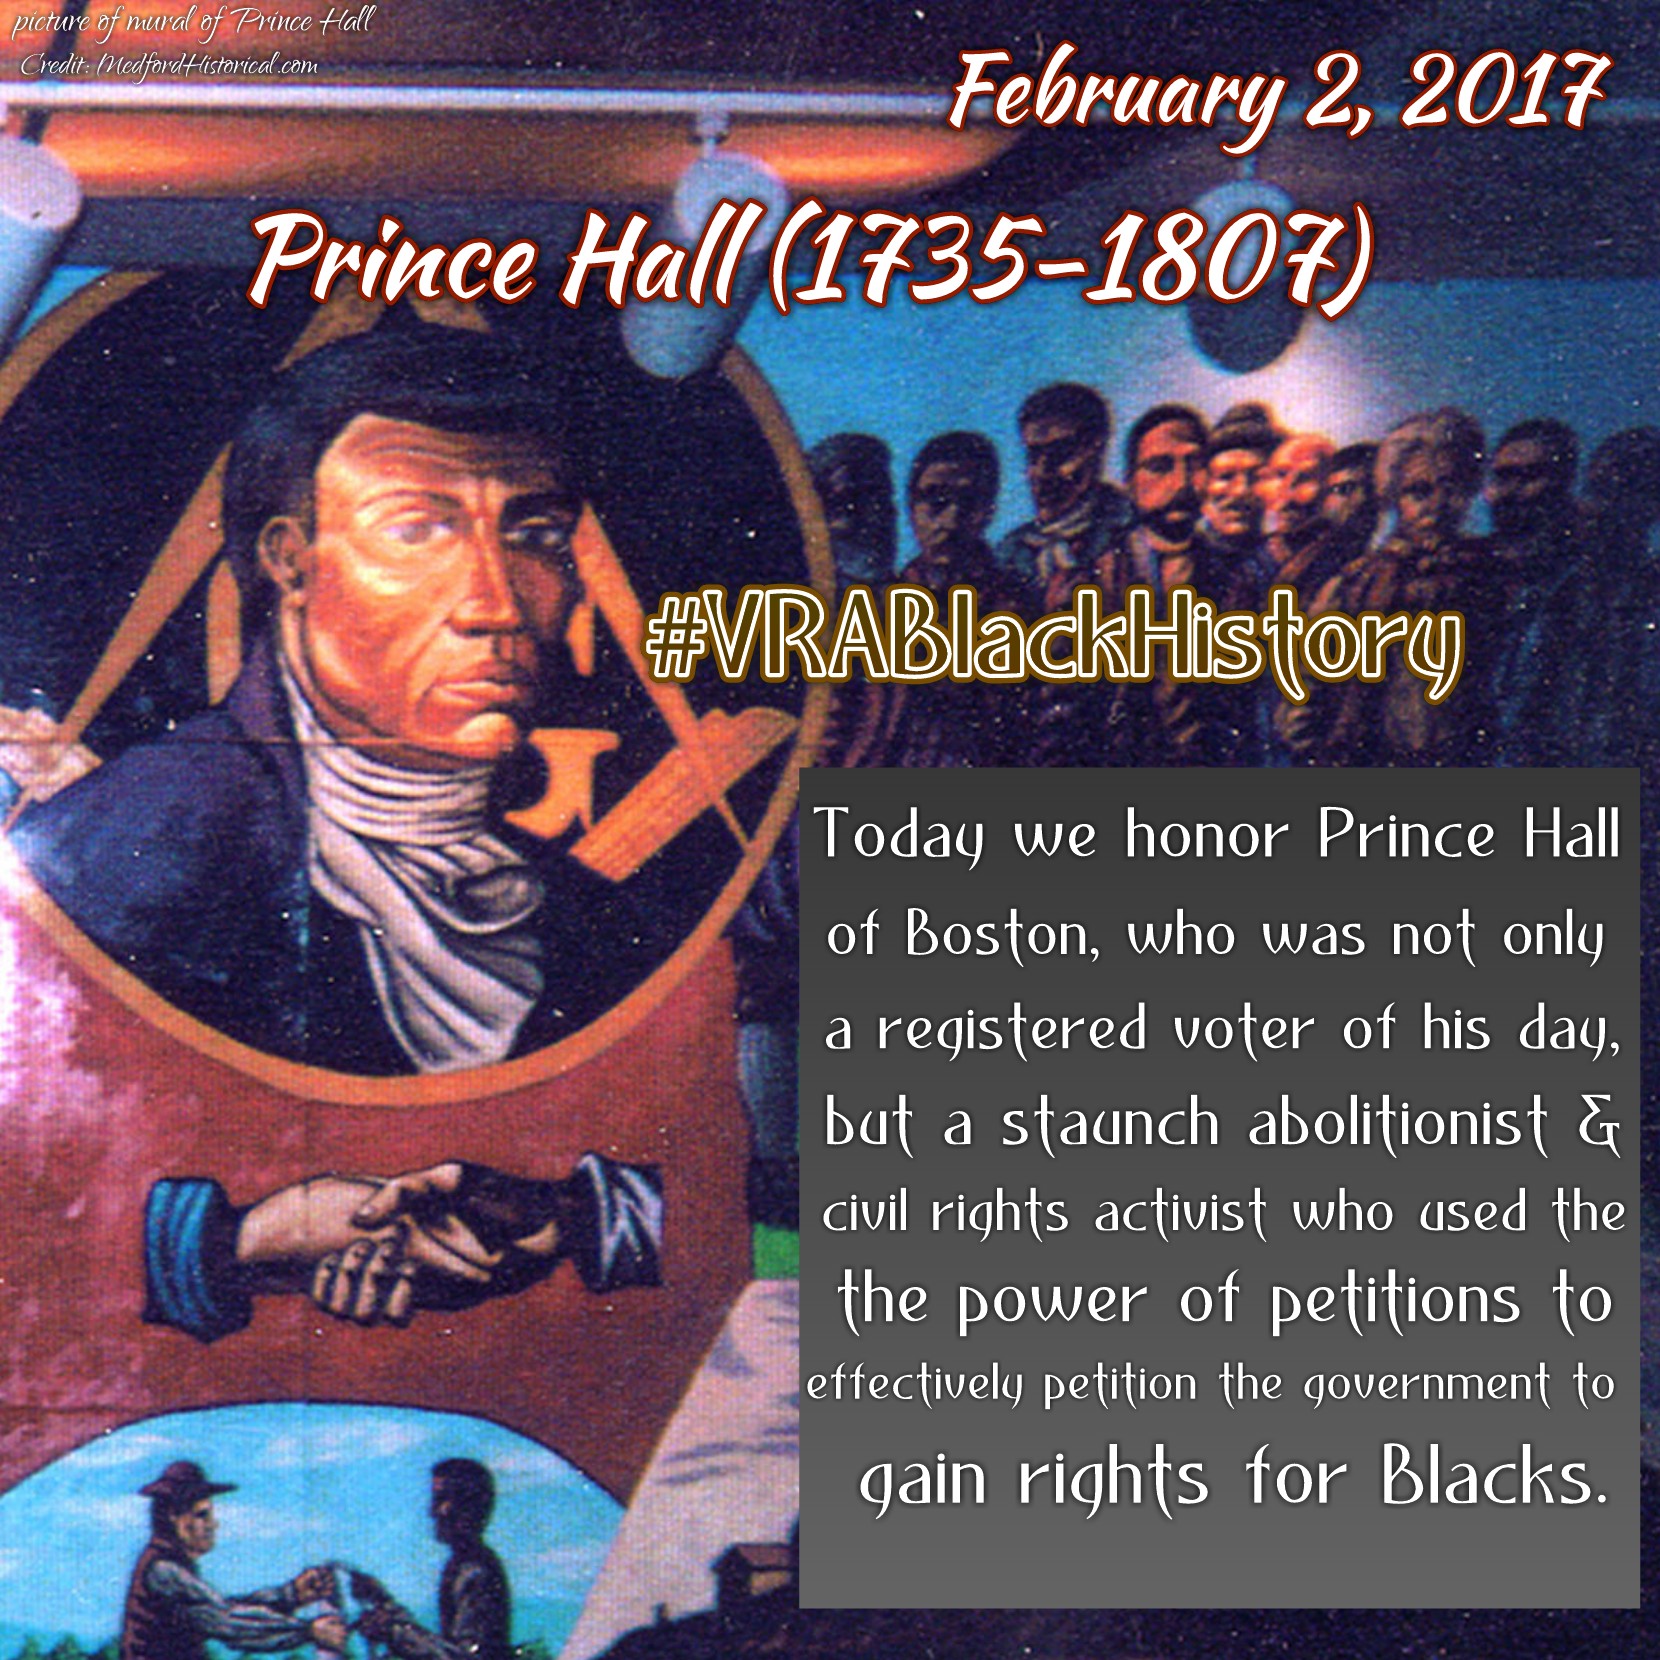 Today we honor Prince Hall of Boston, who was not only a registered voter of his day, but a staunch abolitionist and civil rights activist who used the power of petitions to effectively petition the government to gain rights for Blacks. This article…